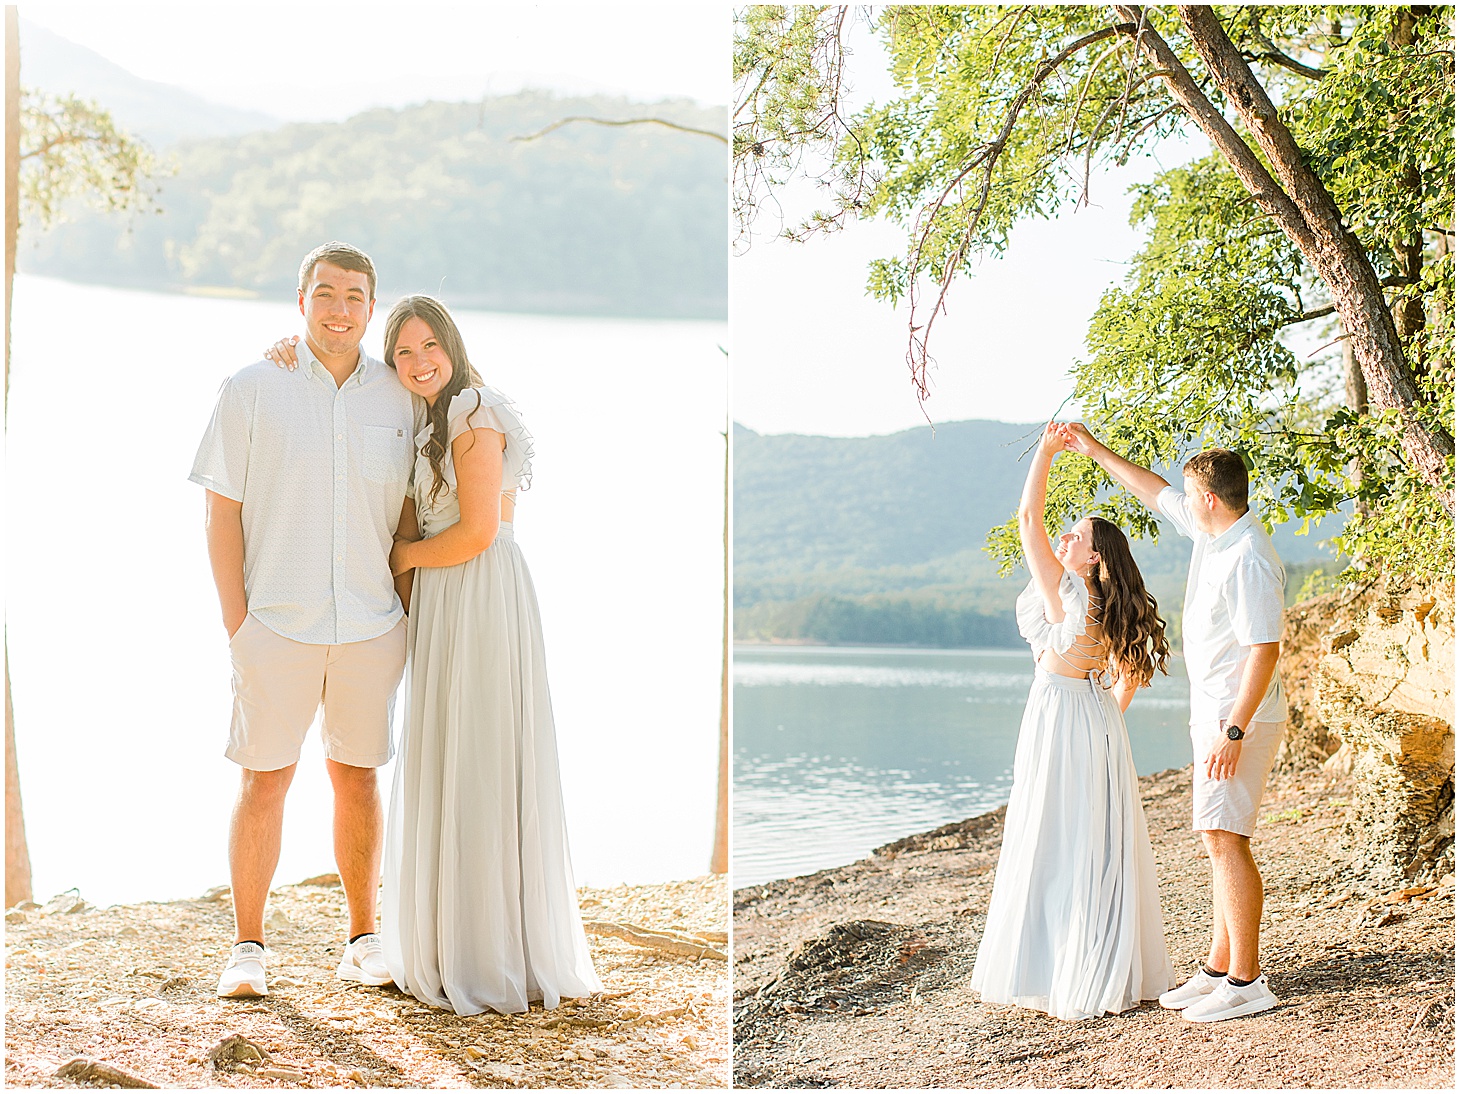 carvinscove_roanokeengagementsession_virginiaweddingphotographer_vaweddingphotographer_photo_0099.jpg